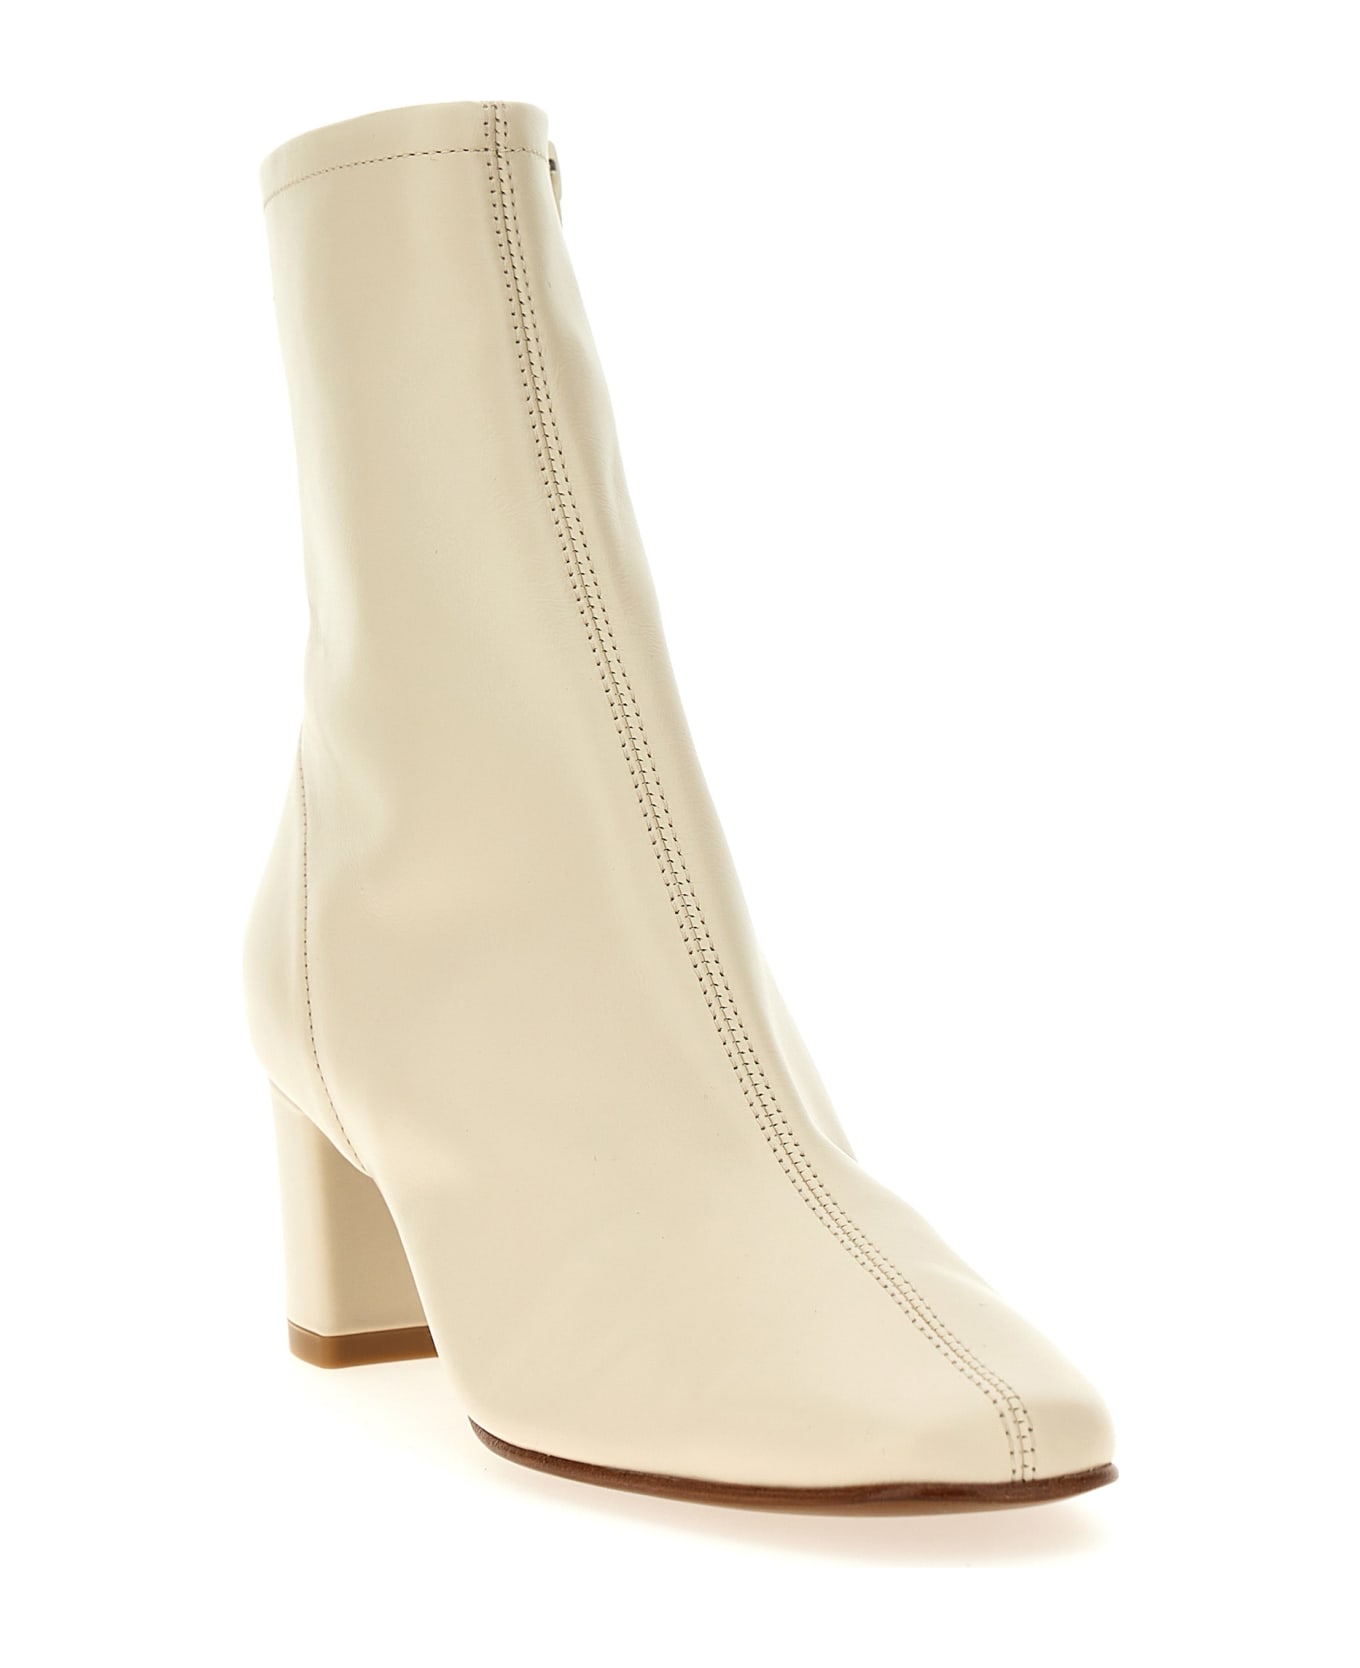 BY FAR 'sofia' Ankle Boots - White